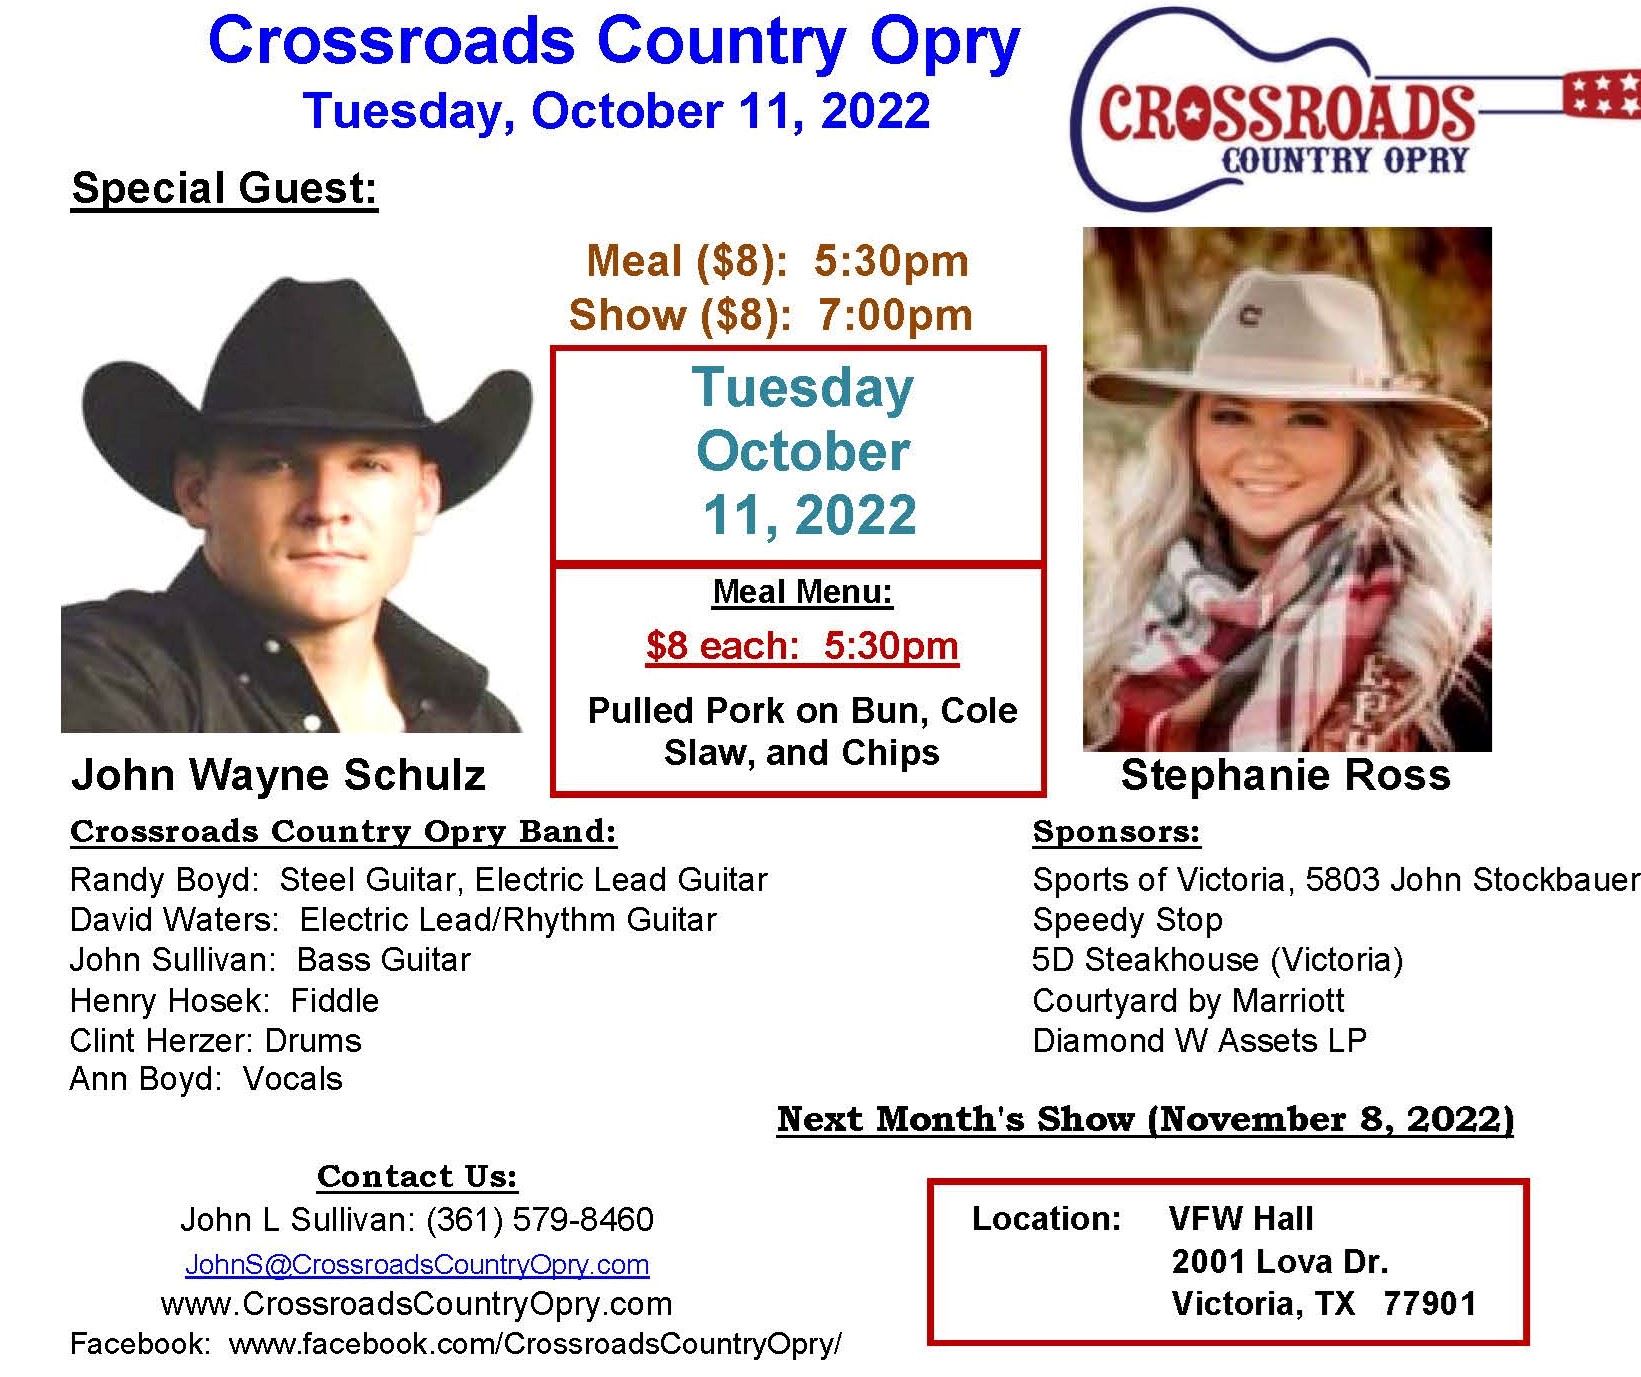 Crossroads Country Opry